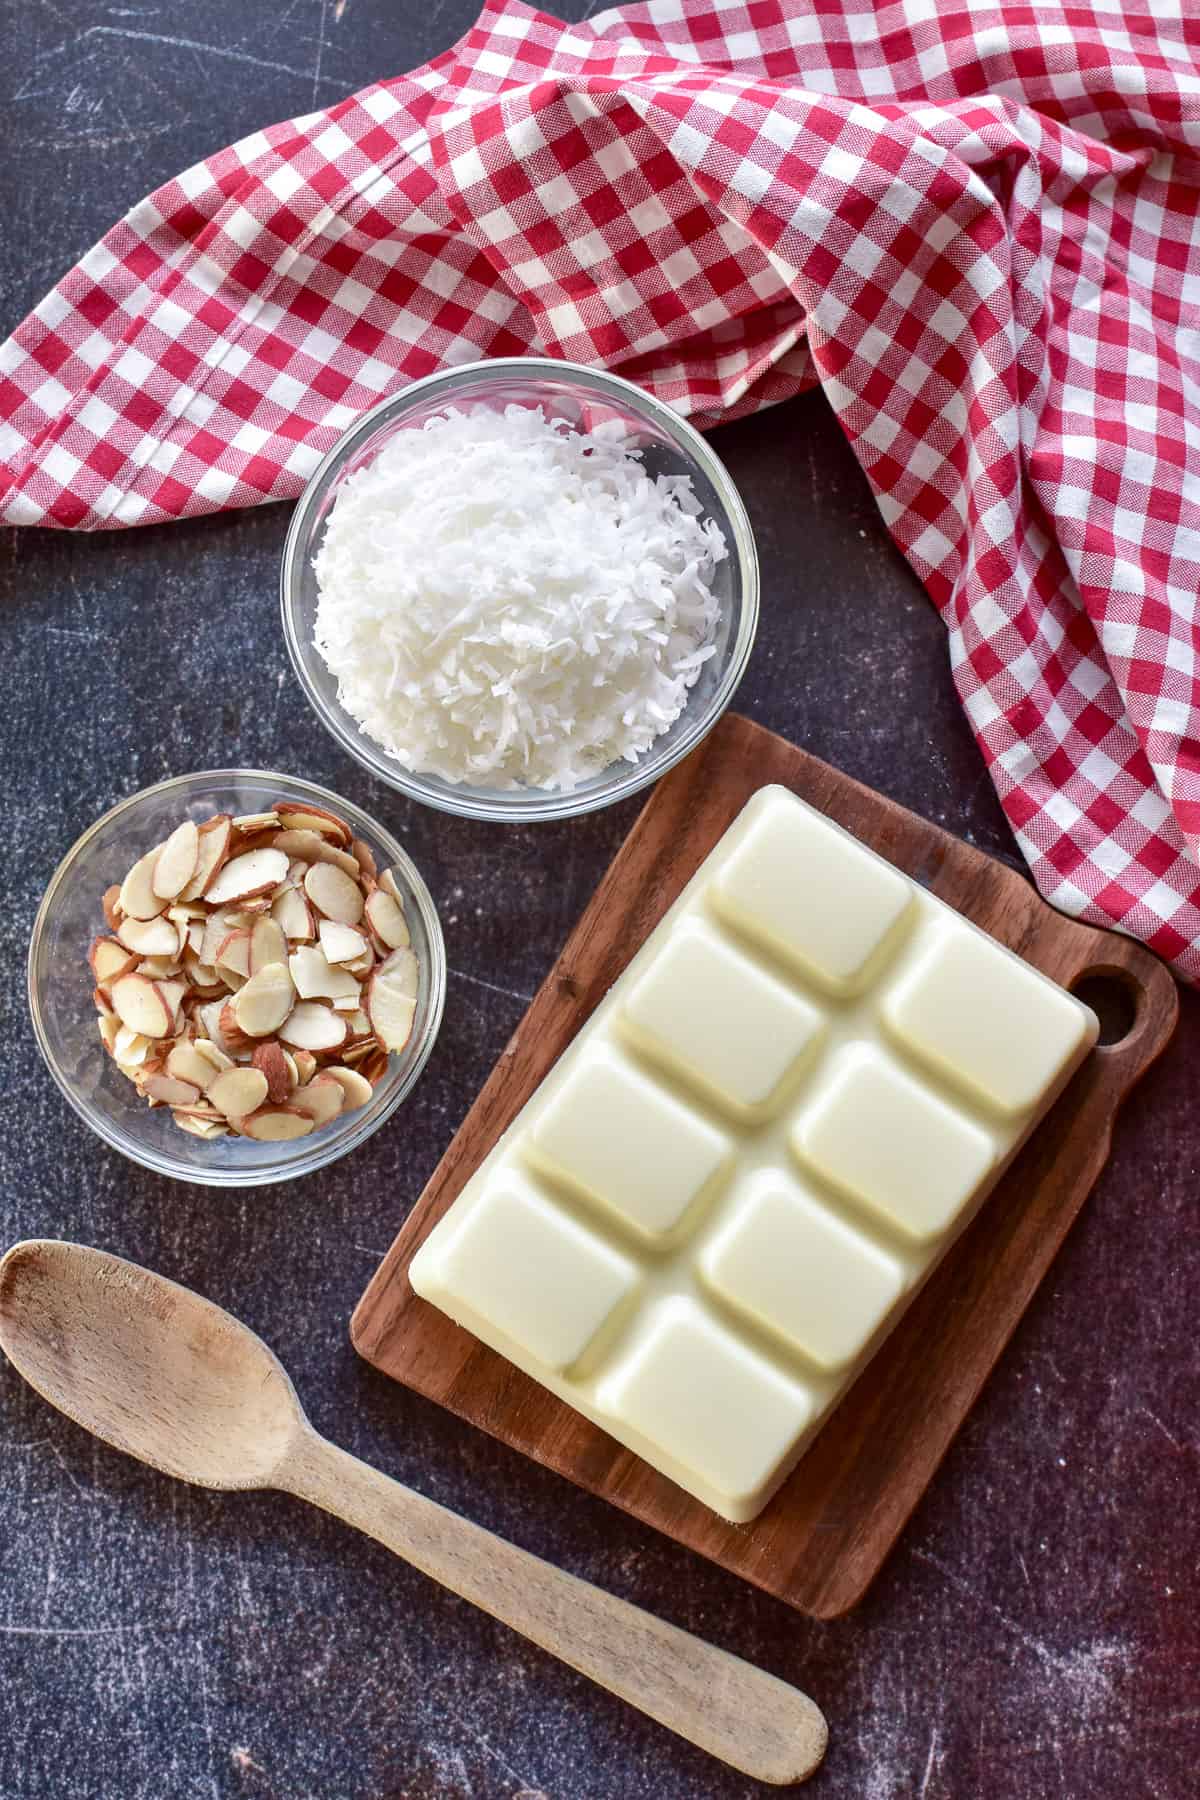 Toasted Coconut Bark ingredients with a red & white checkered towel